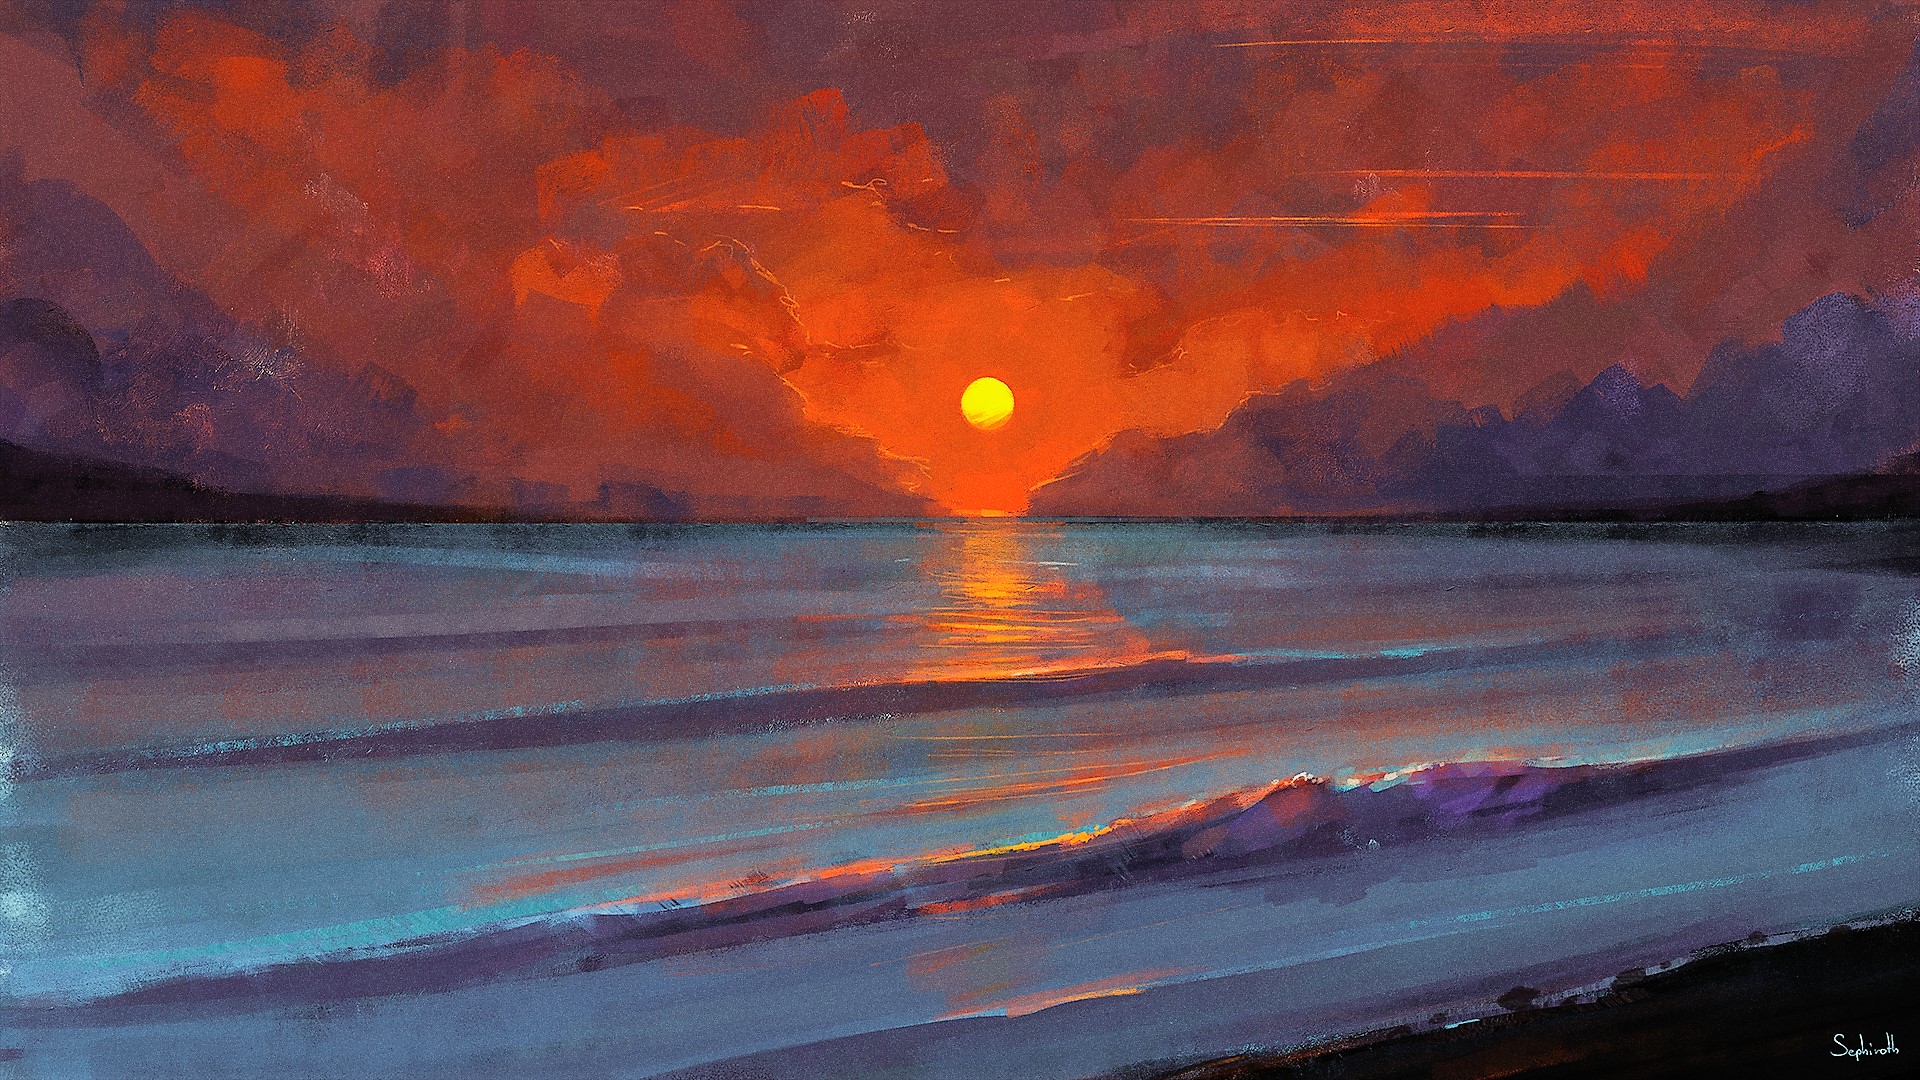 Sunset Painting HD Wallpaper | Background Image | 1920x1080 | ID:946729 - Wallpaper Abyss